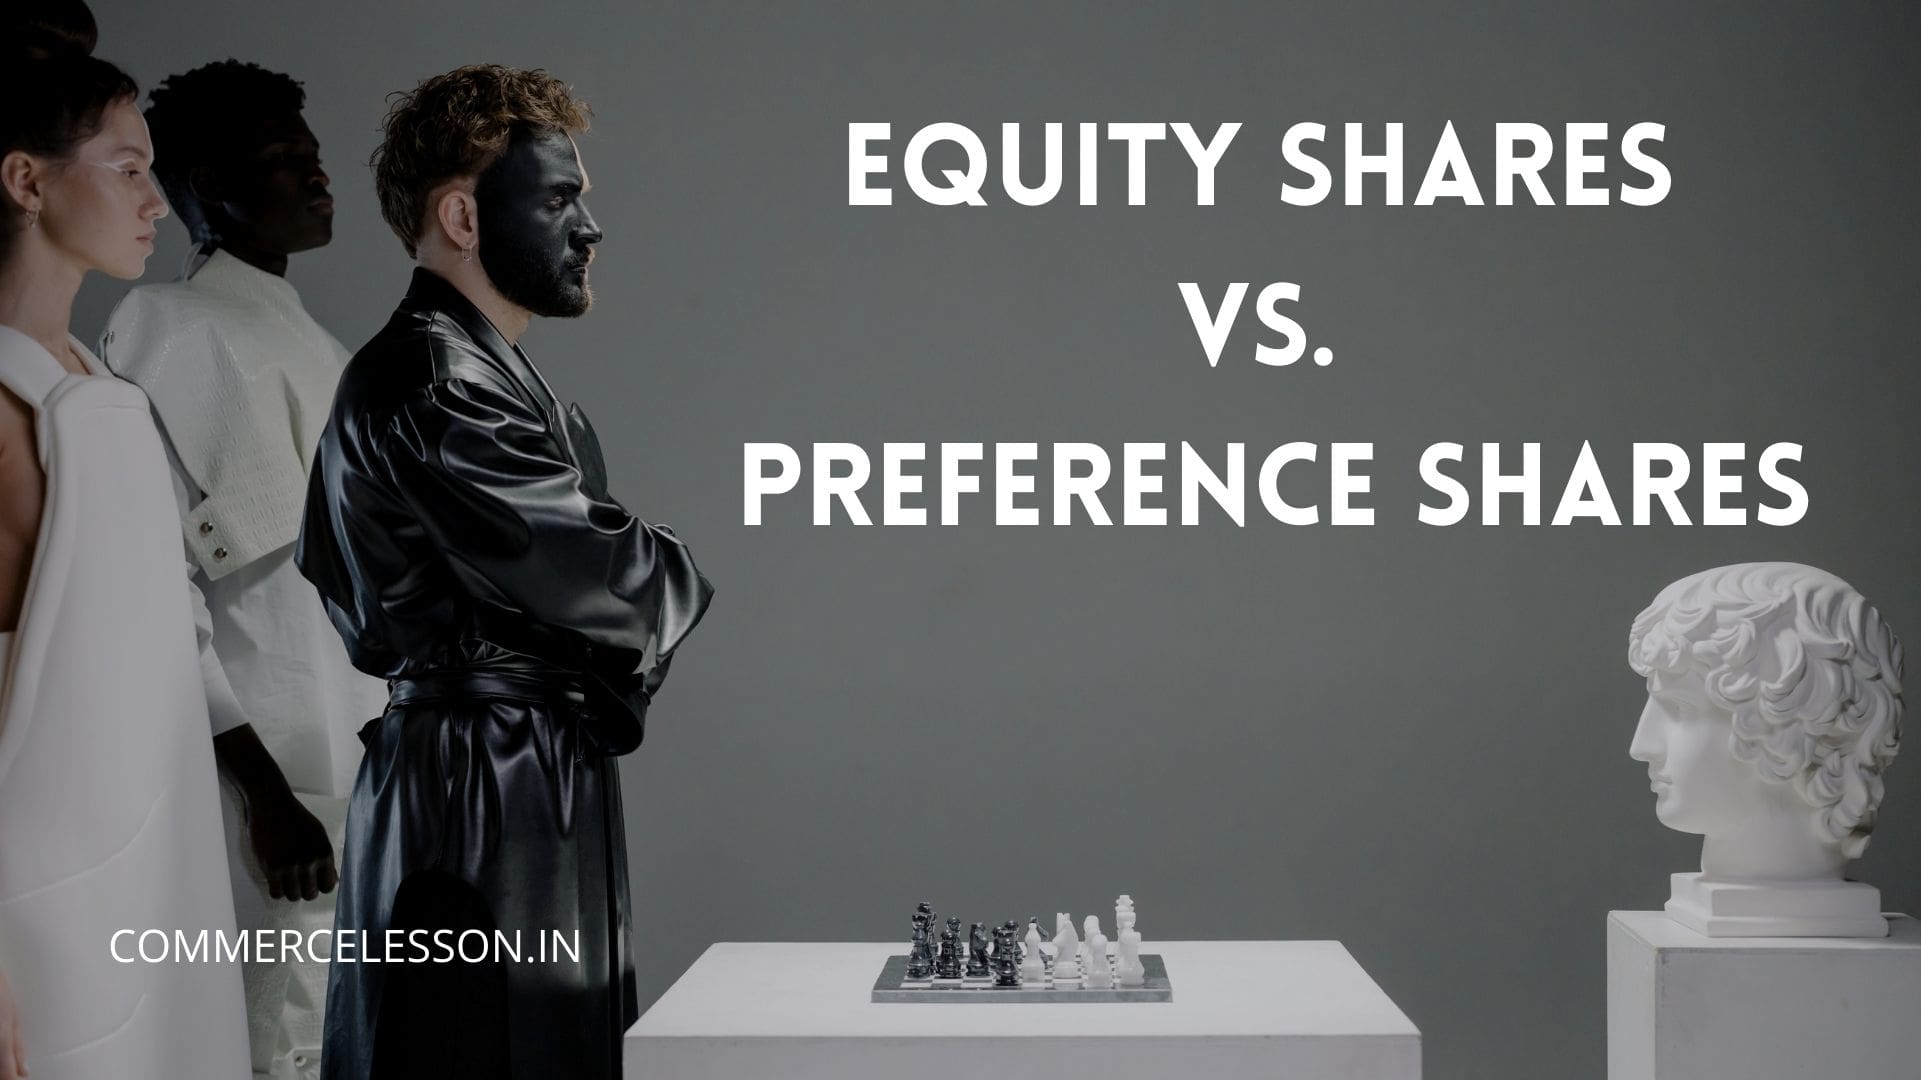 Distinguish between Equity Shares and Preference Shares